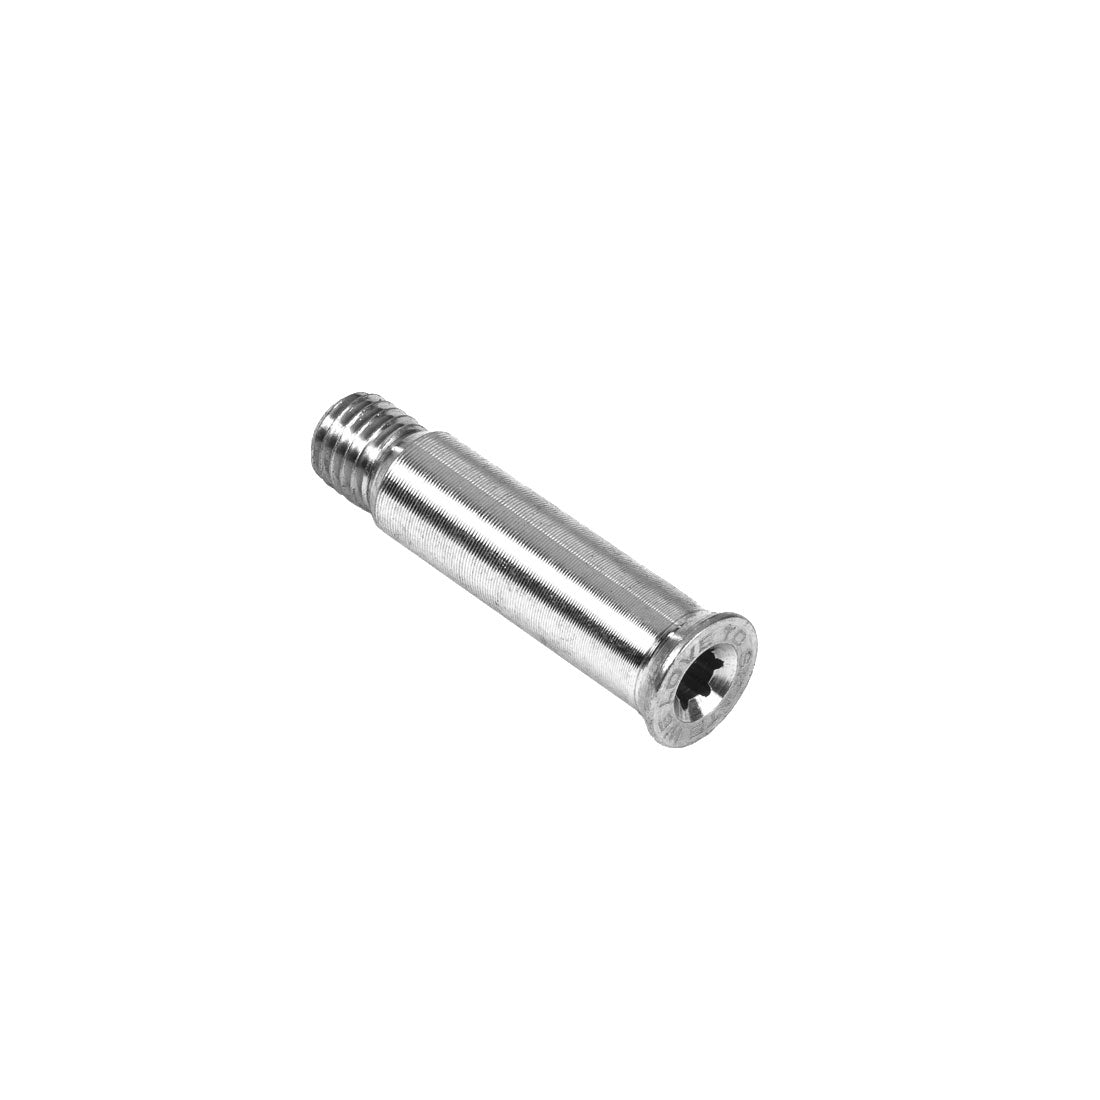 Powerslide Axle Hex 36mm/8mm - Single Inline Hardware and Parts